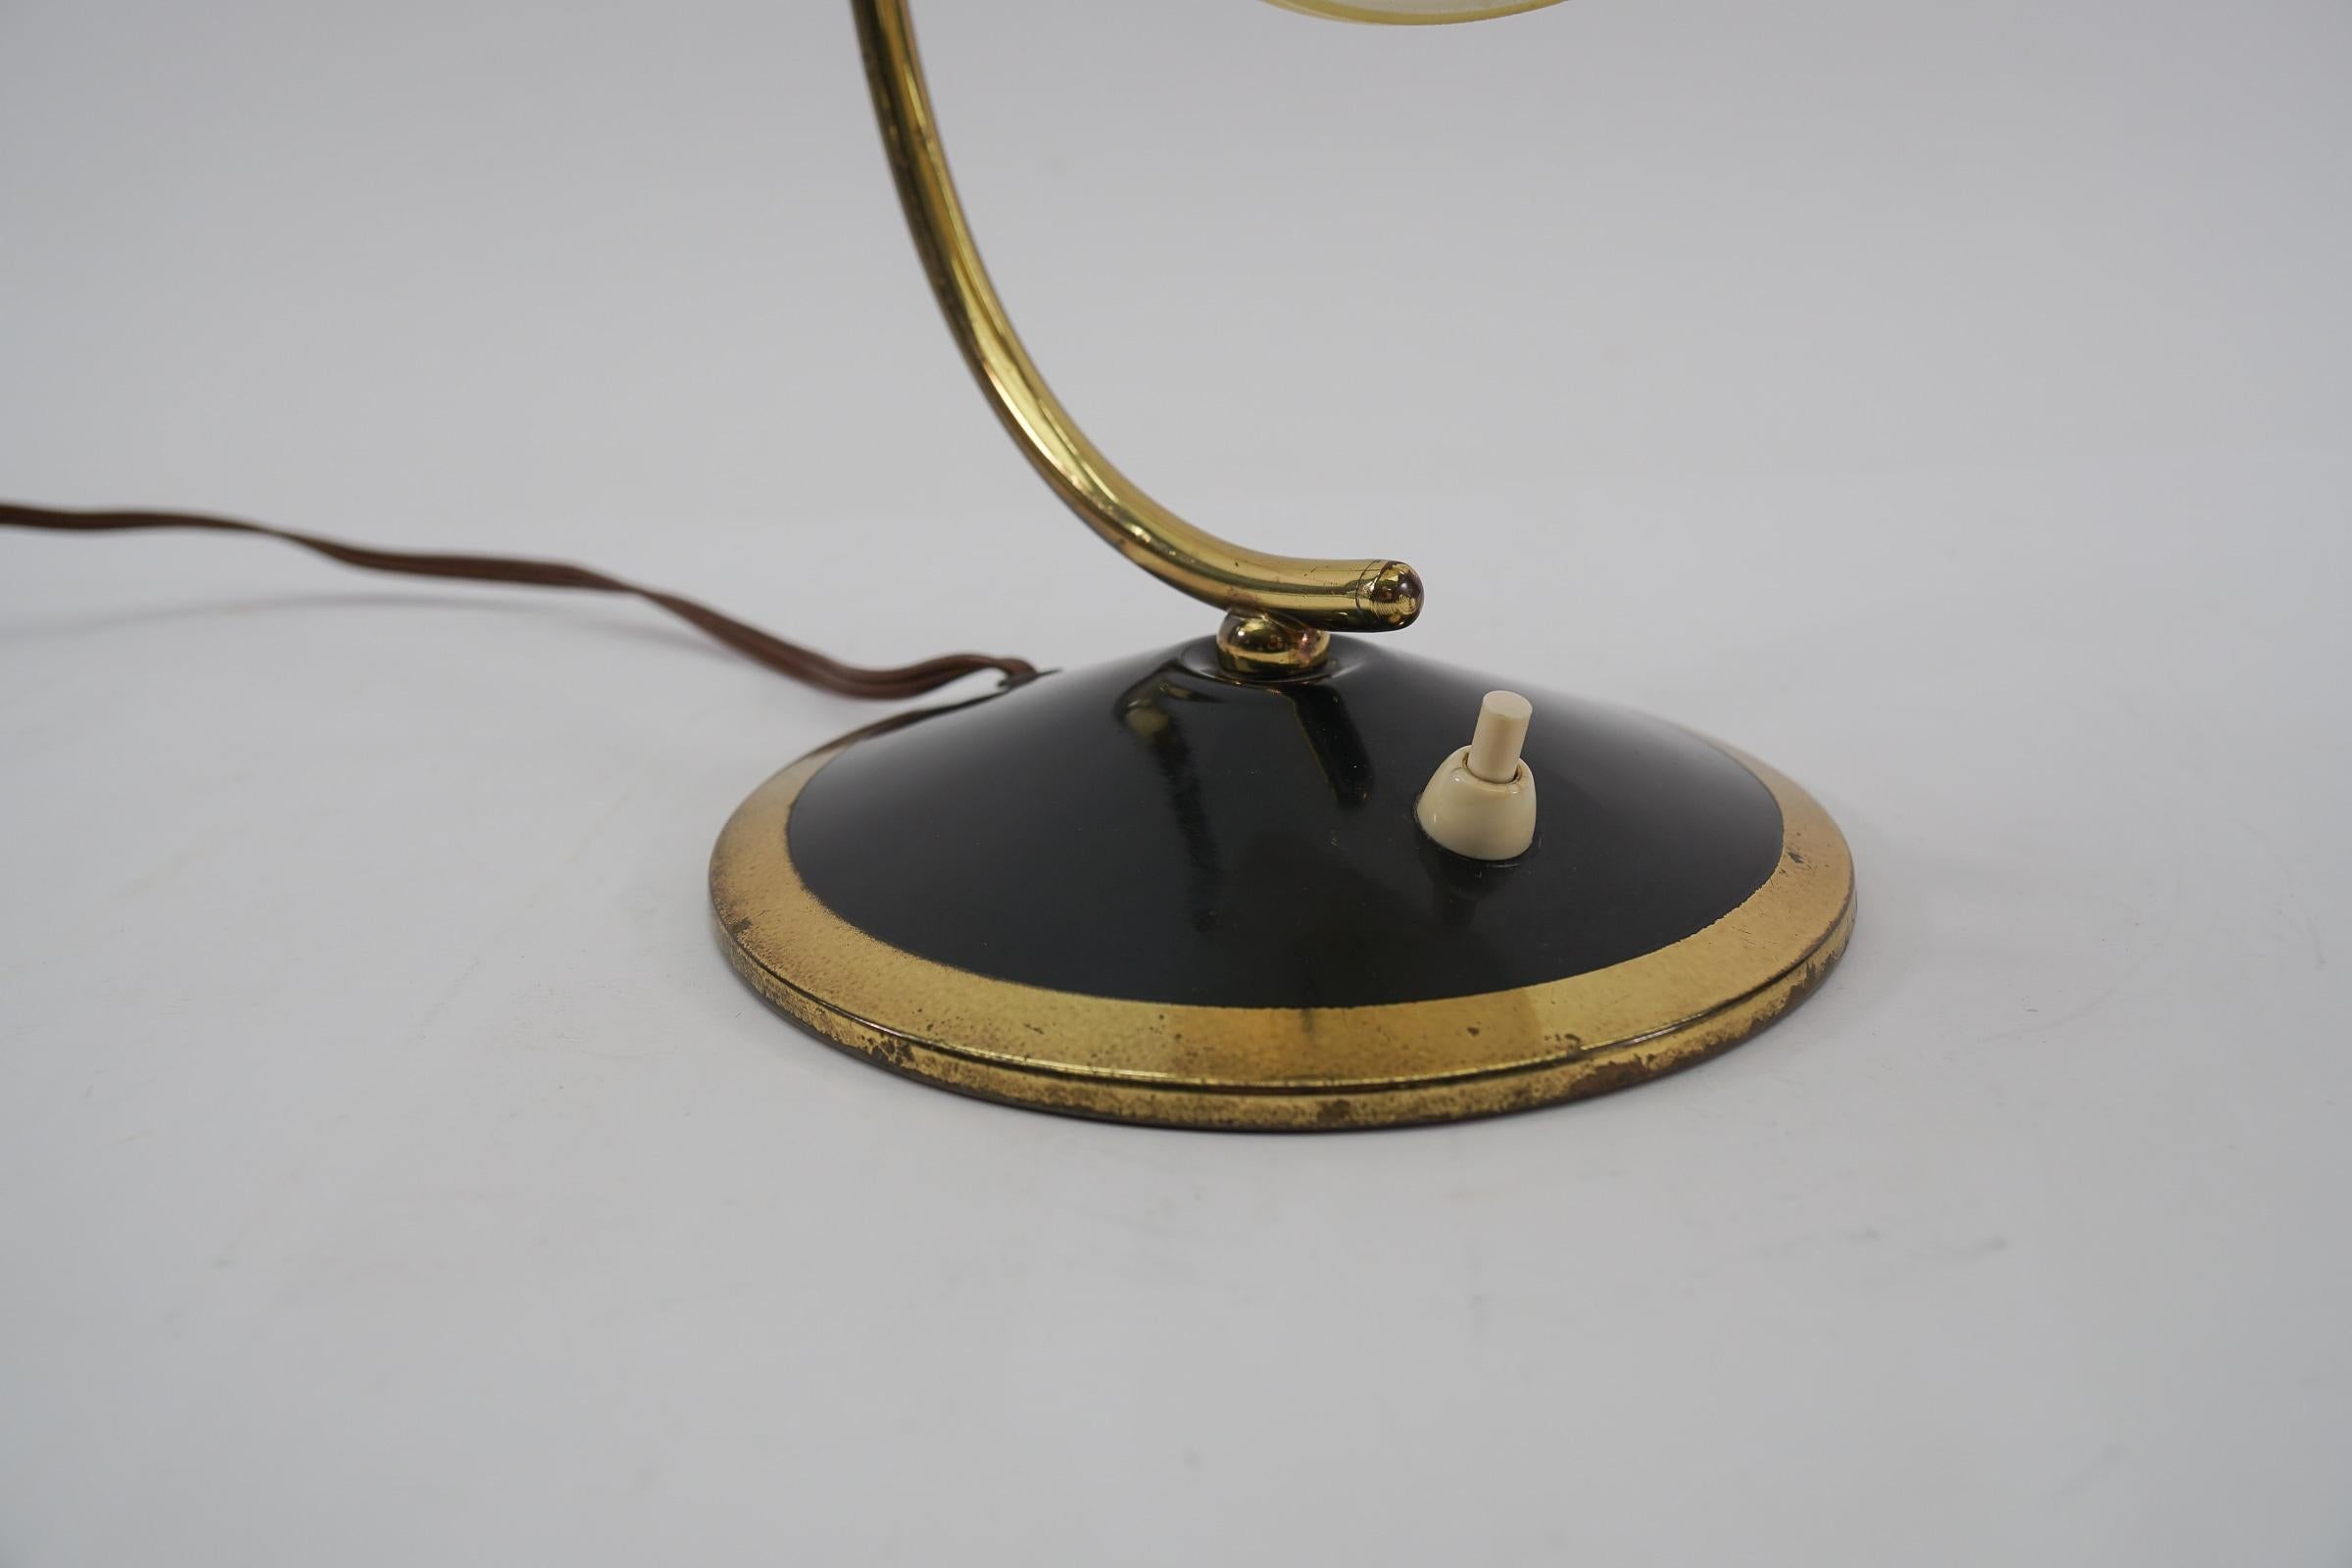 Lovely Midcentury Table Lampe Made in Glass and Brass, 1950s, Austria For Sale 1